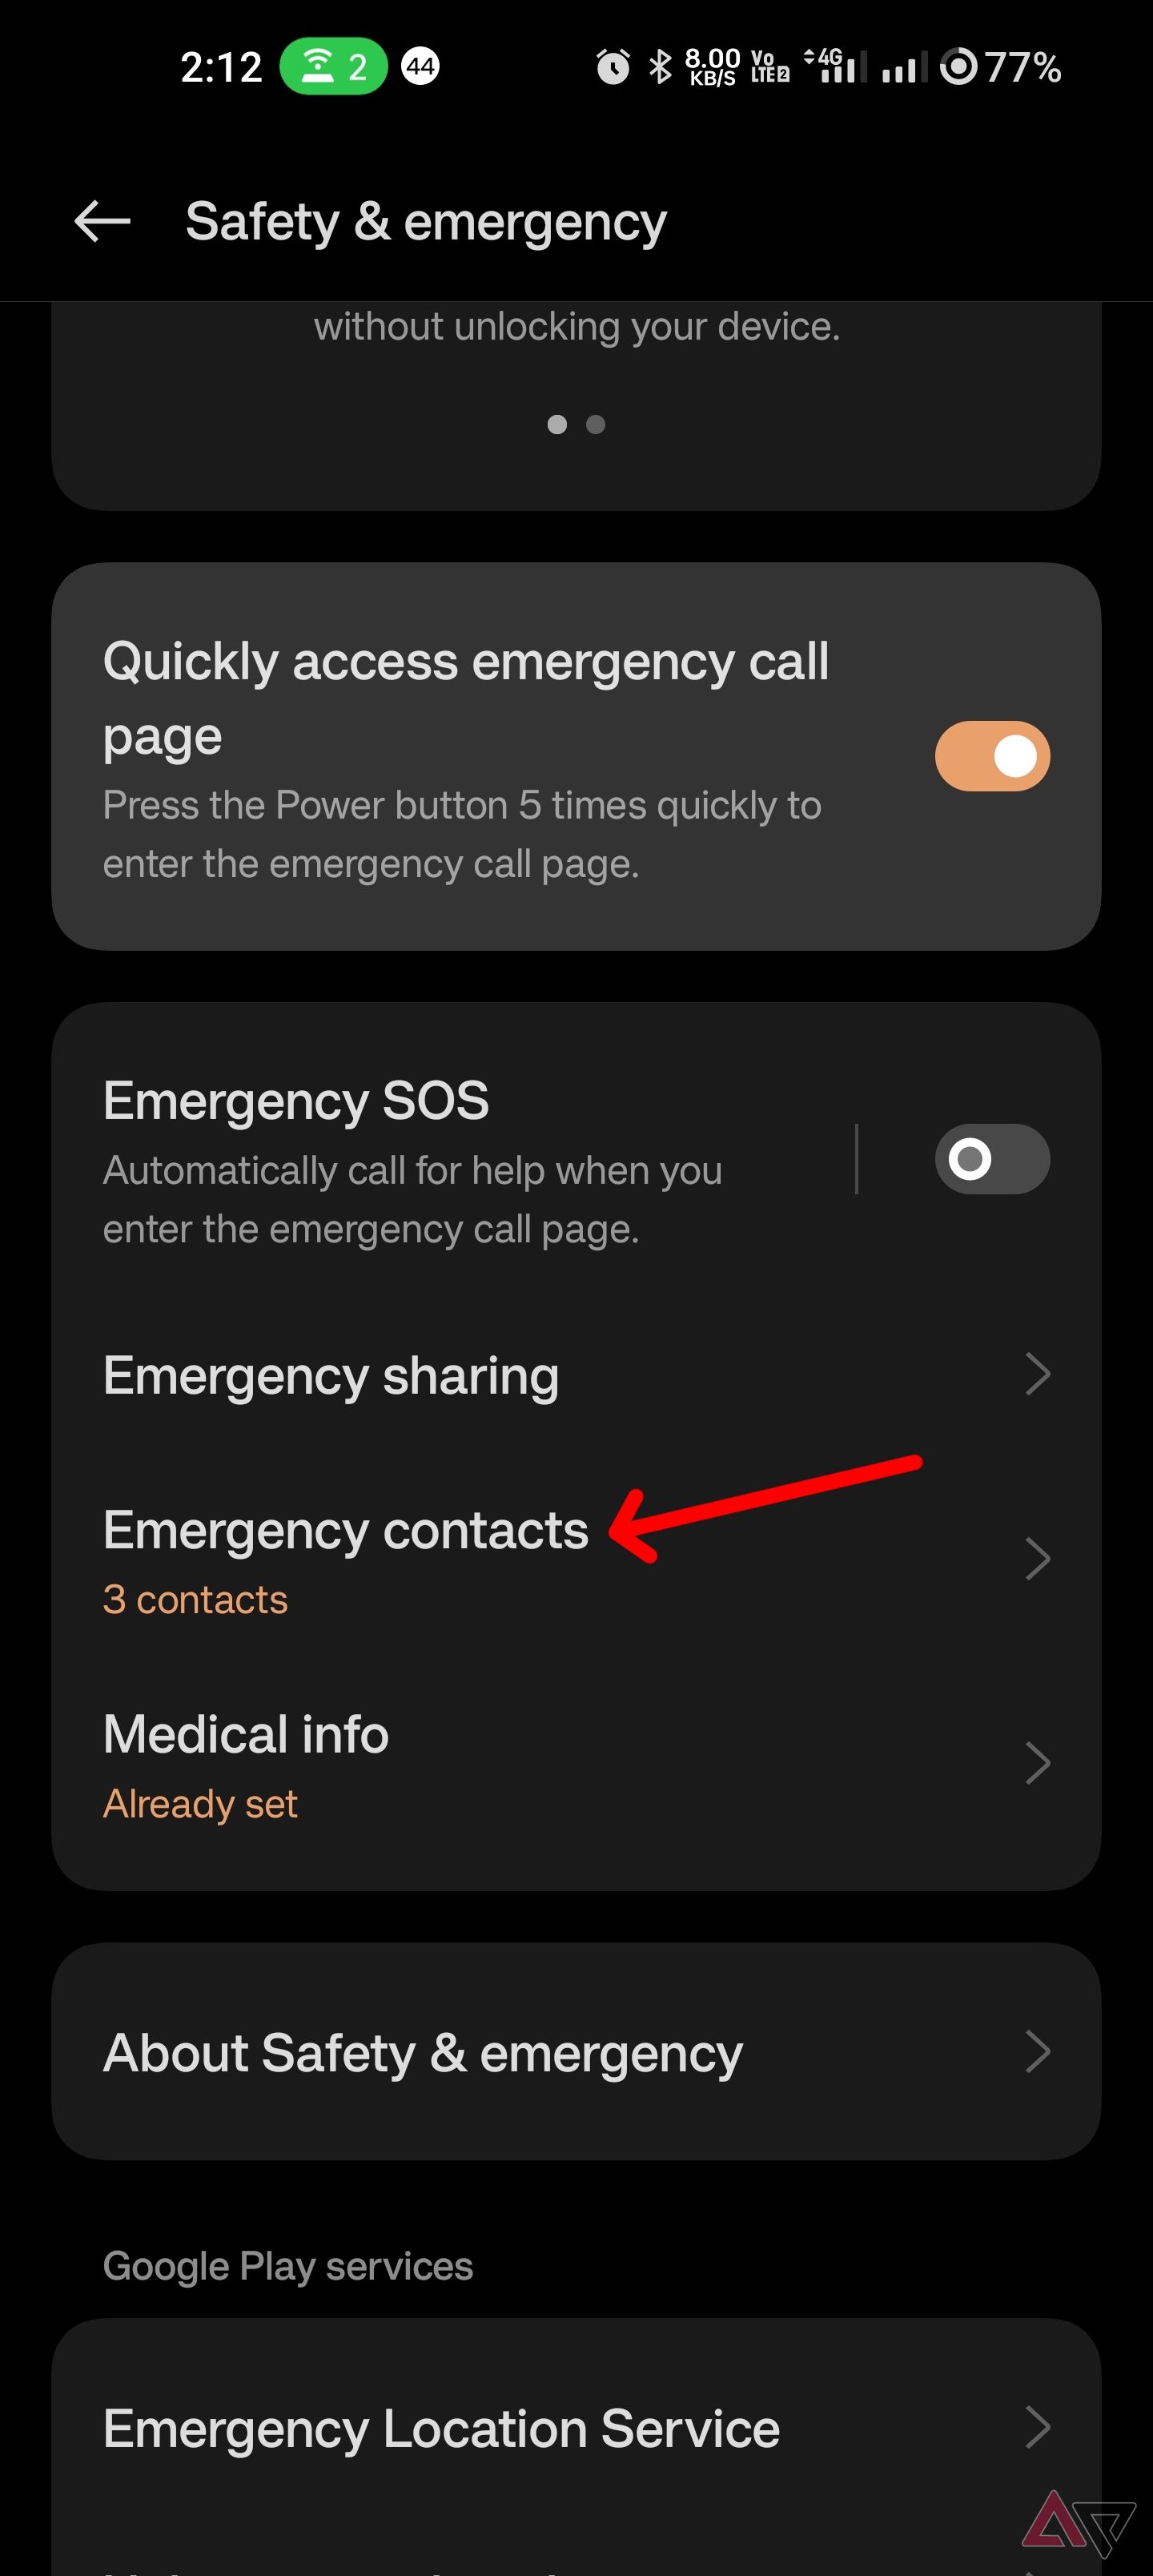 Click emergency contacts to access the submenu.